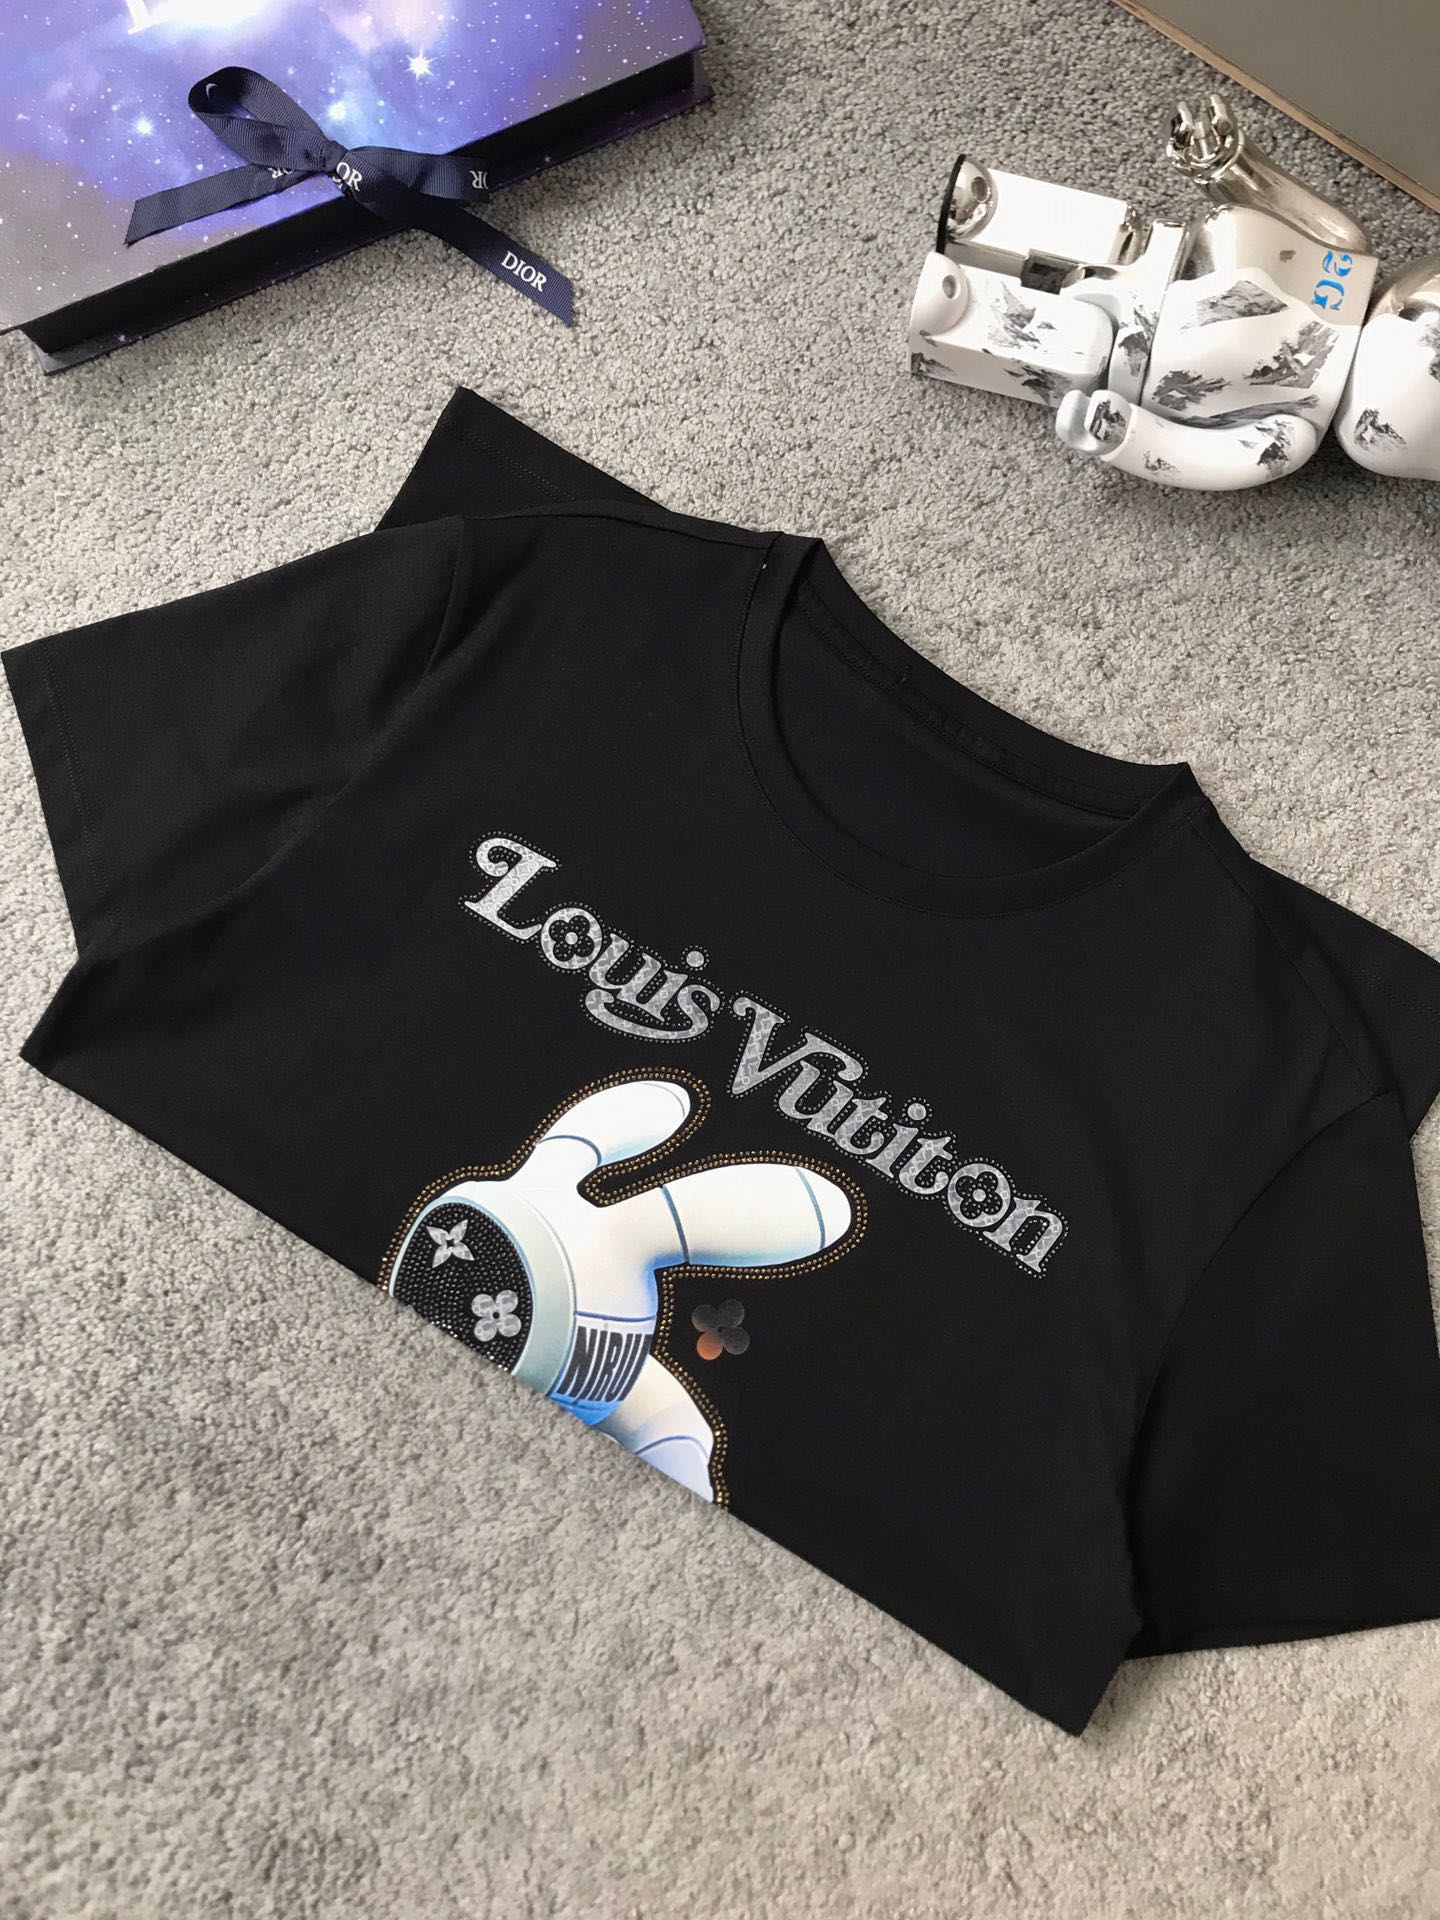 Louis Vuitton Clothing Shirts & Blouses T-Shirt Summer Collection Short Sleeve